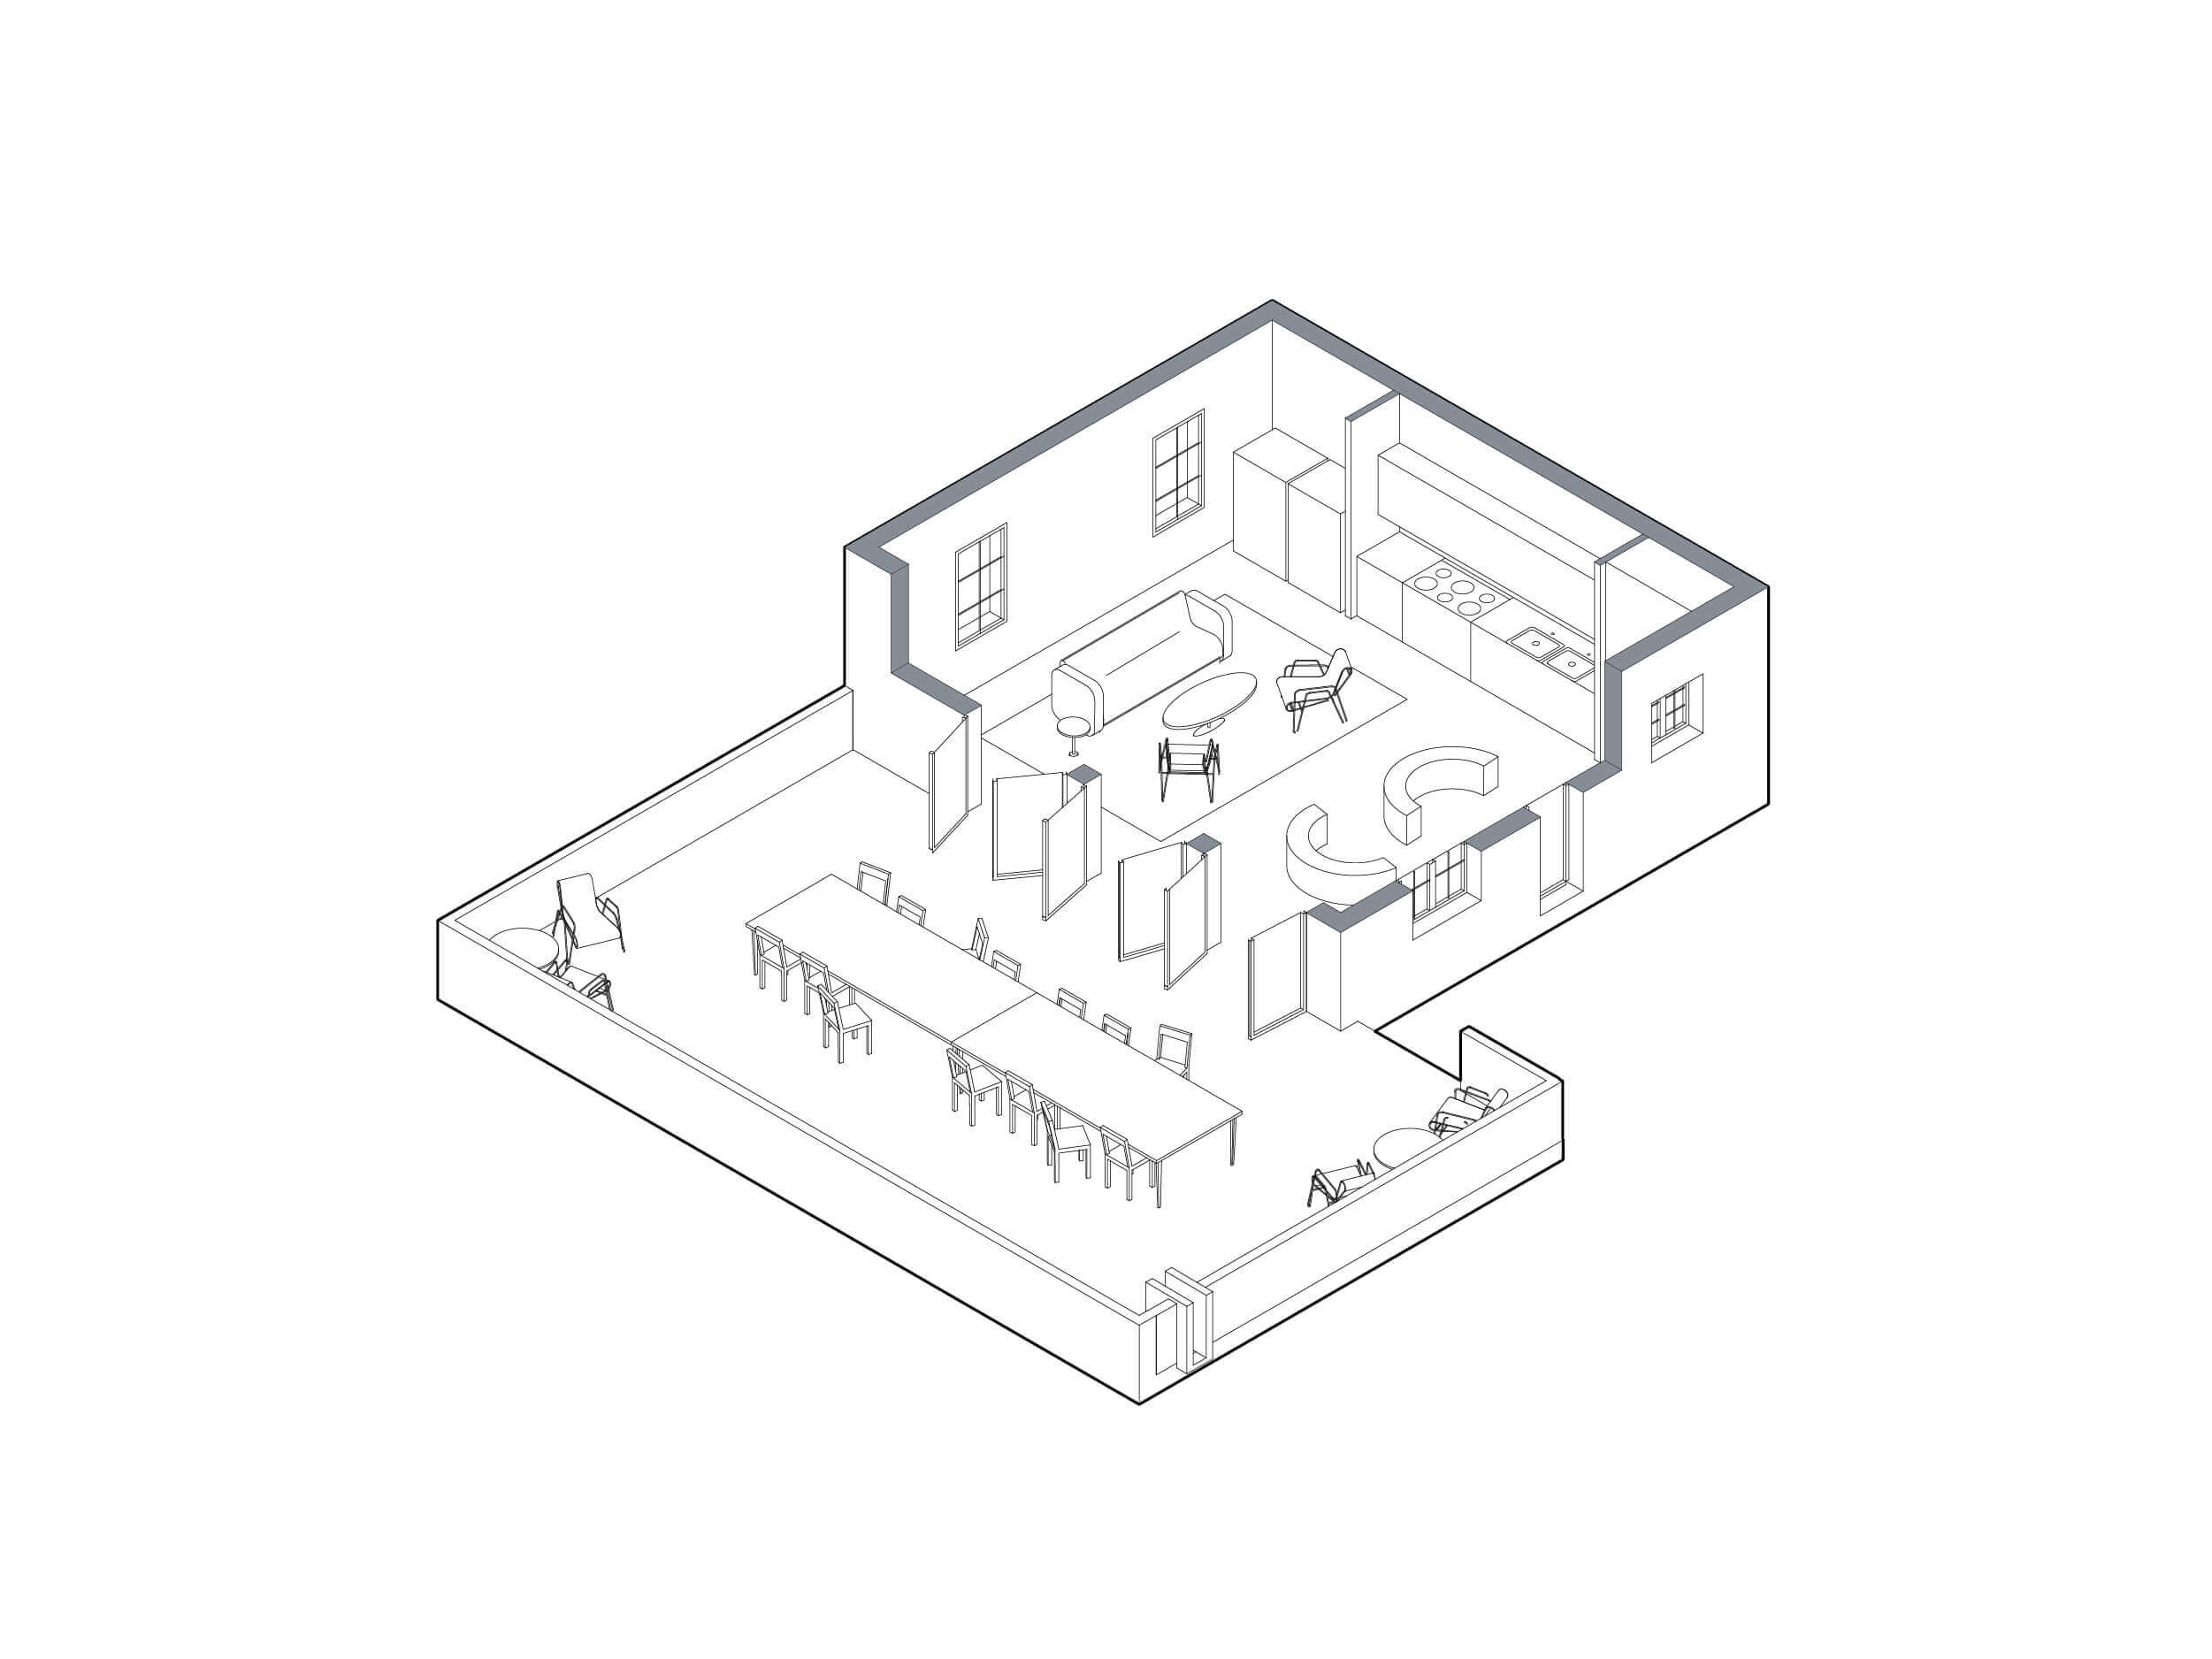 Axonometric detail drawing of a housing project